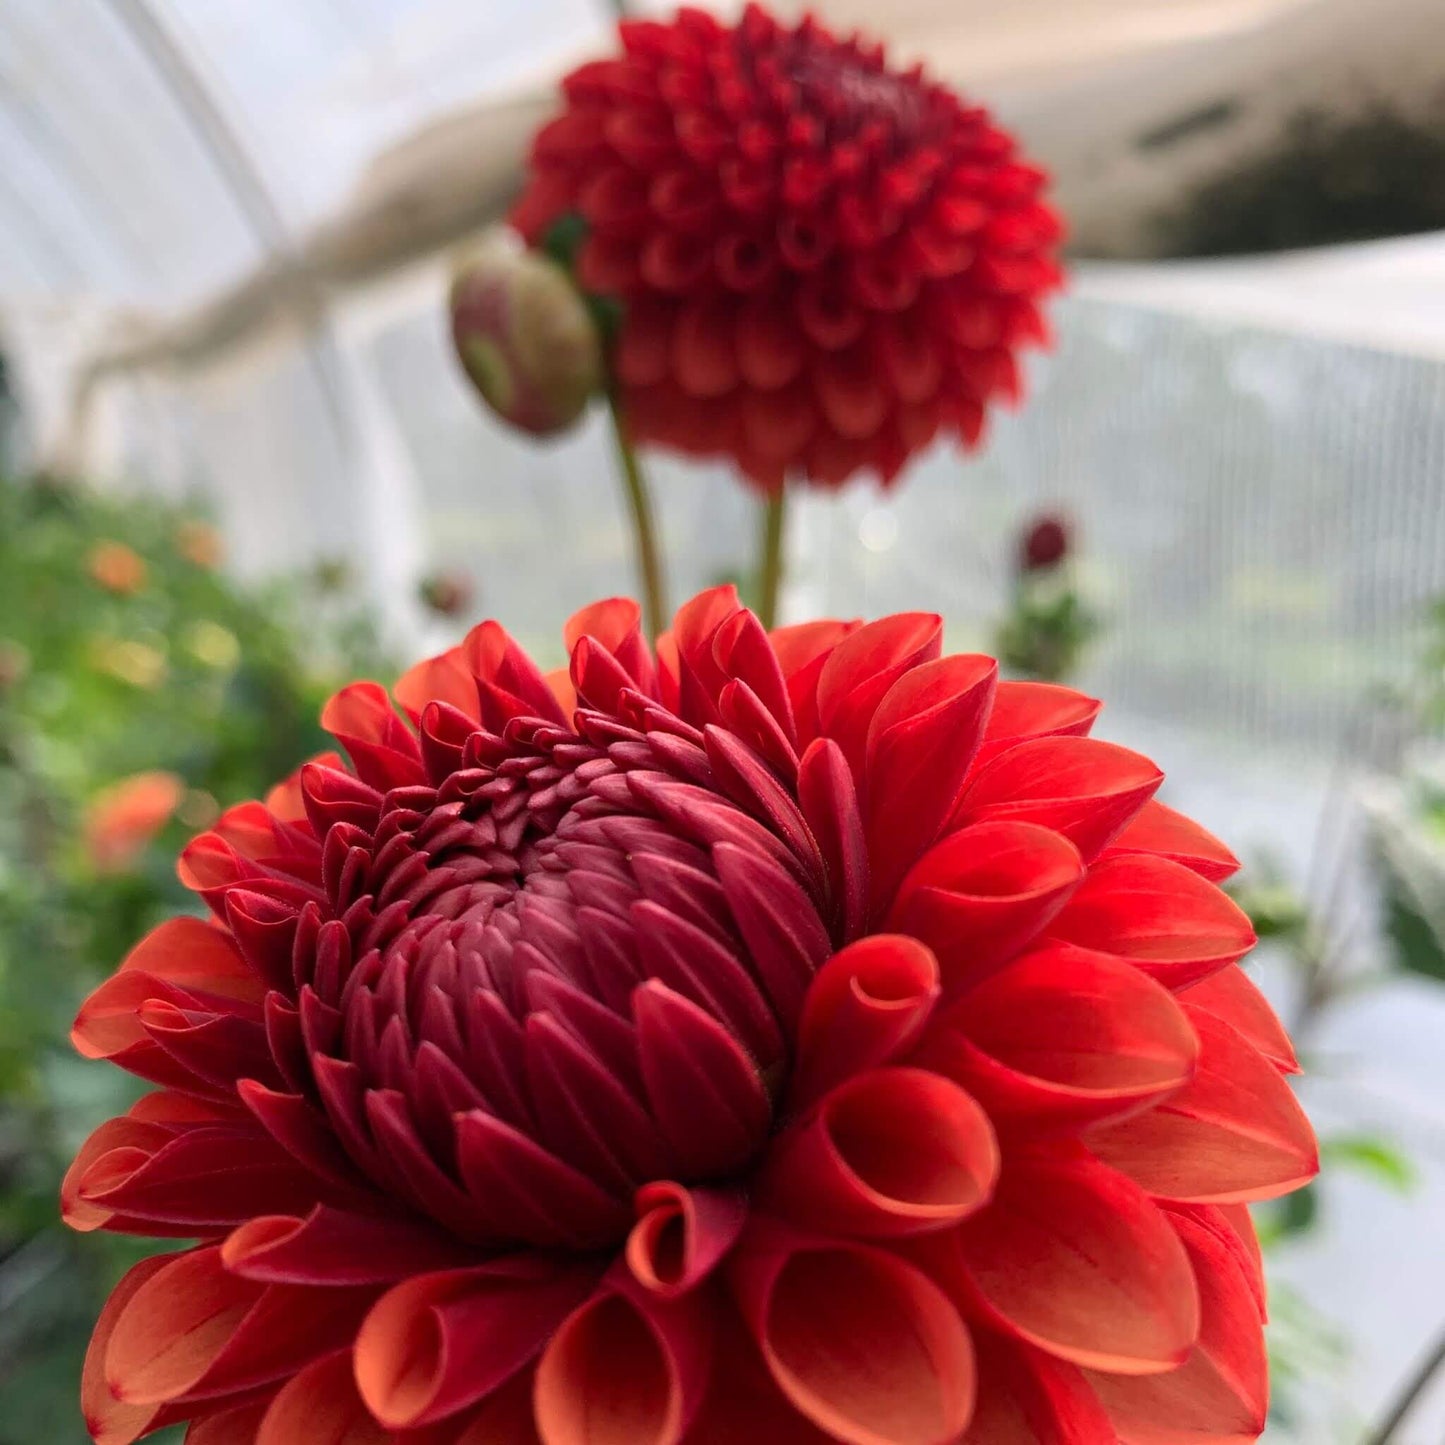 Brown Sugar dahlia rooted cuttings for sale